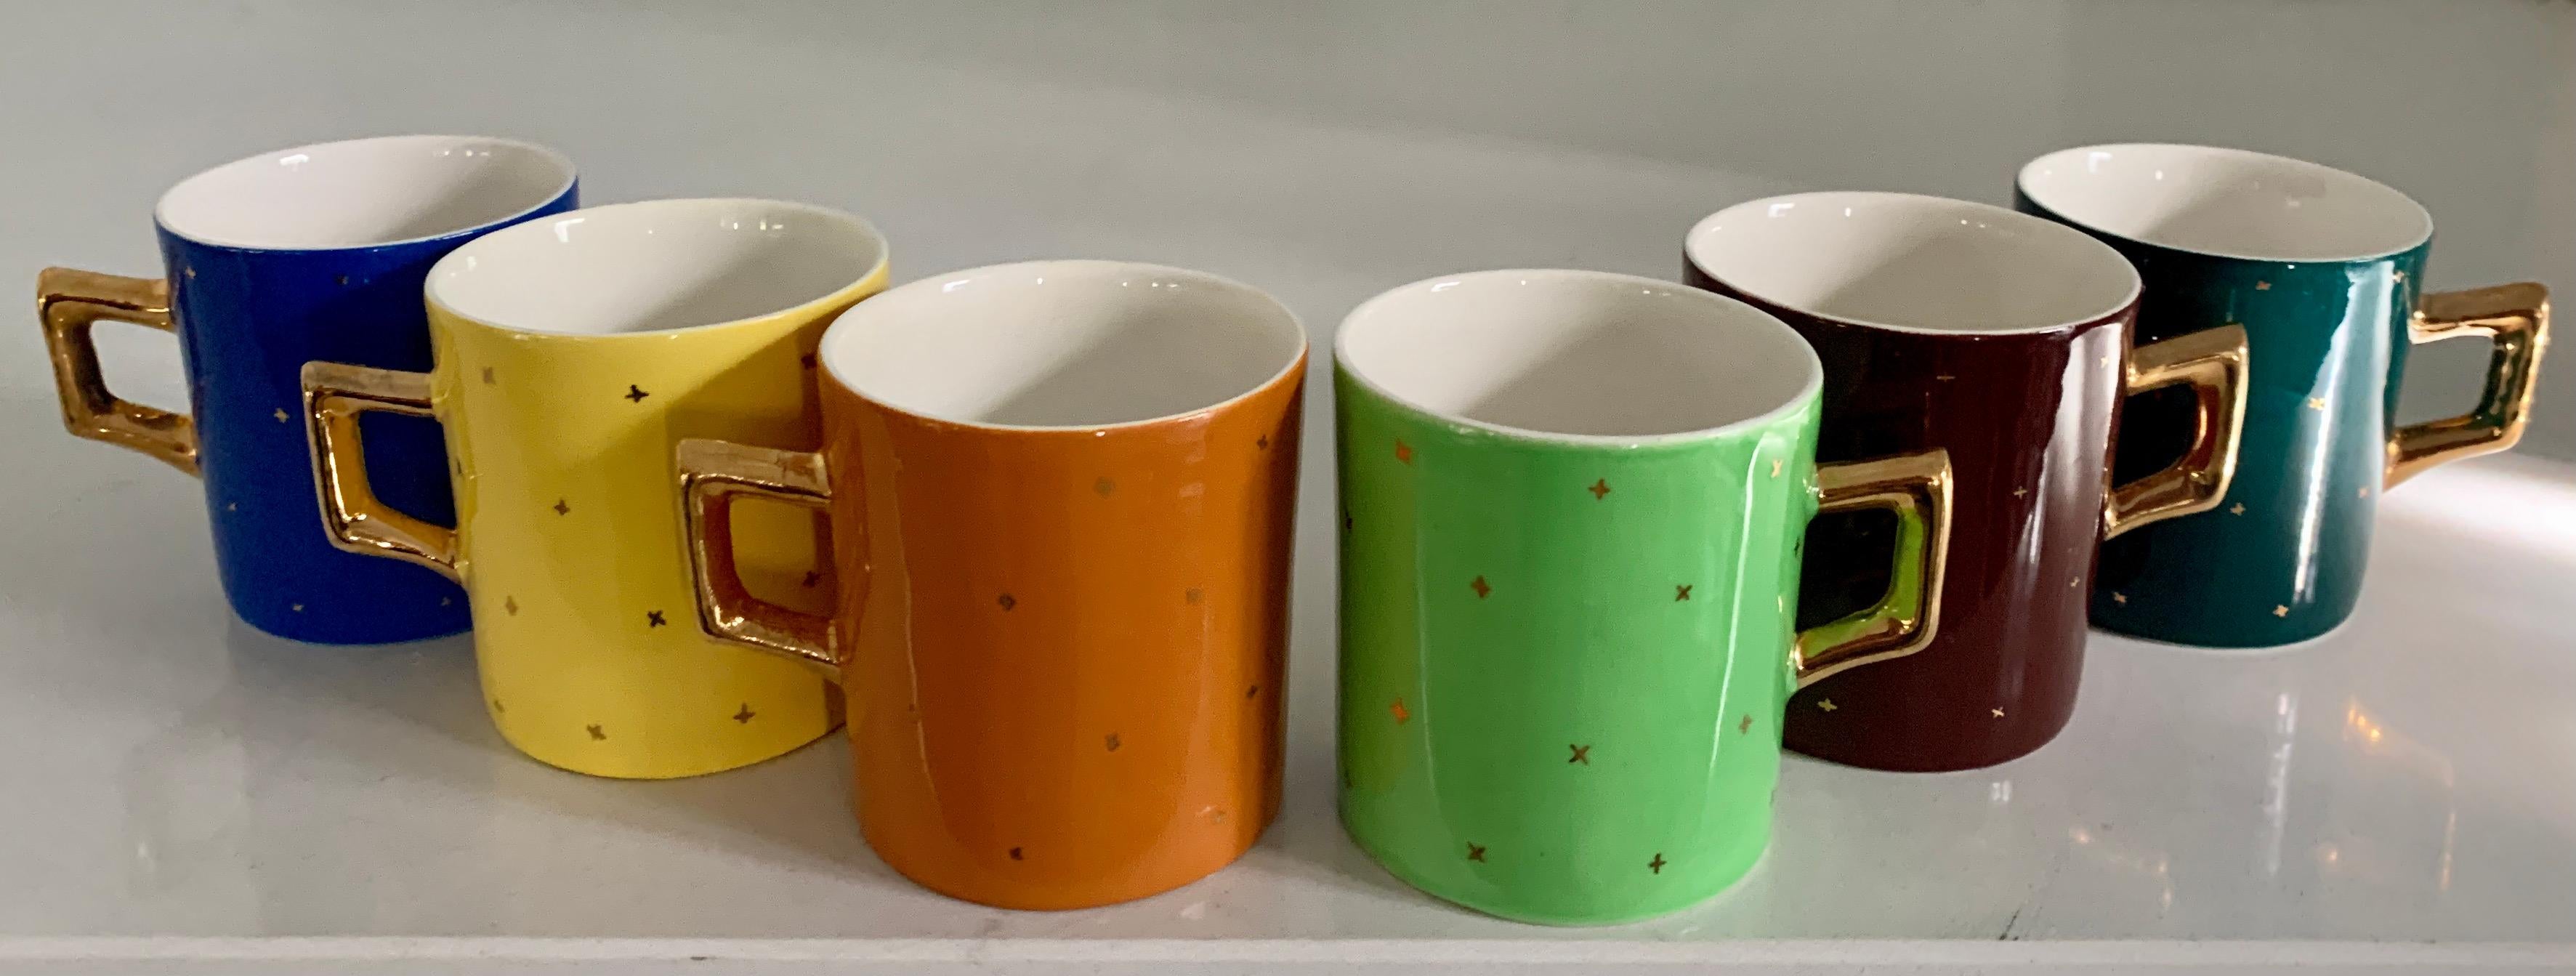 A set of 6 Espresso cups. The set are Italian and in wonderful colors (so your guests never are confused about which espresso is intended for them). Each cup is of a different color and all contain a star pattern. A great house warming gift, holiday